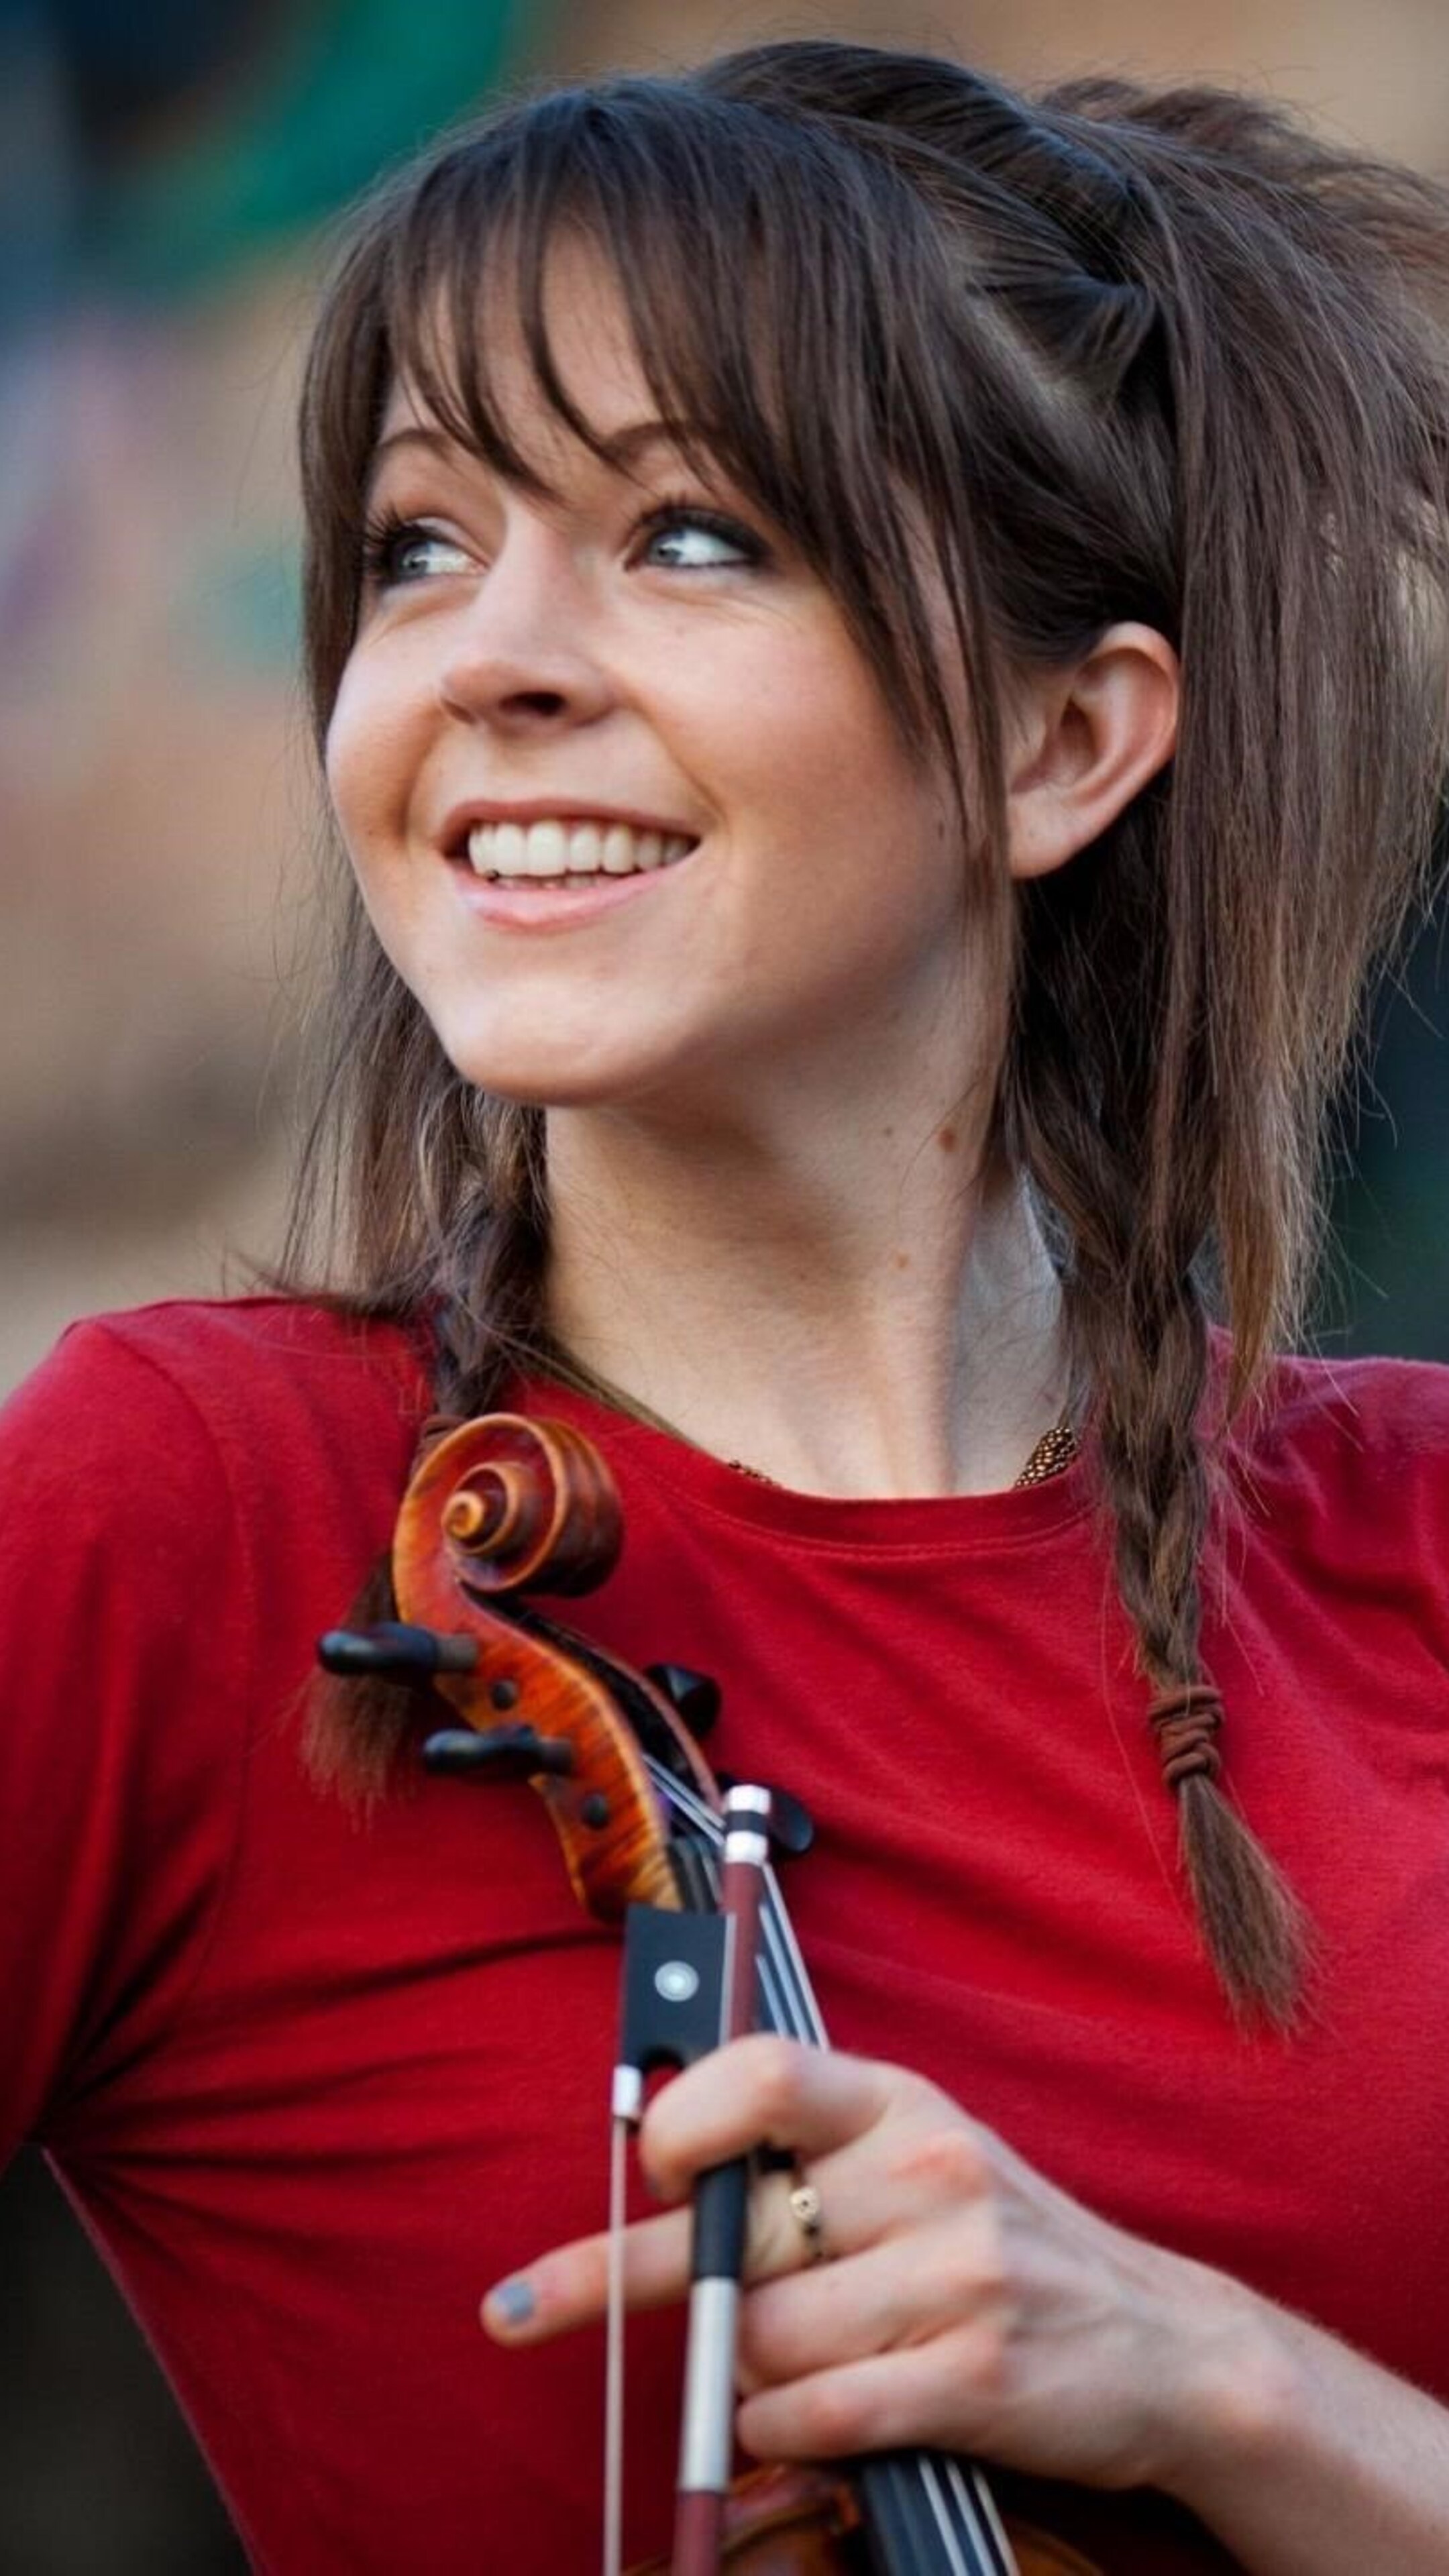 Lindsey Stirling, Cute Sony Xperia wallpapers, High quality images, Adorable photos, 2160x3840 4K Phone